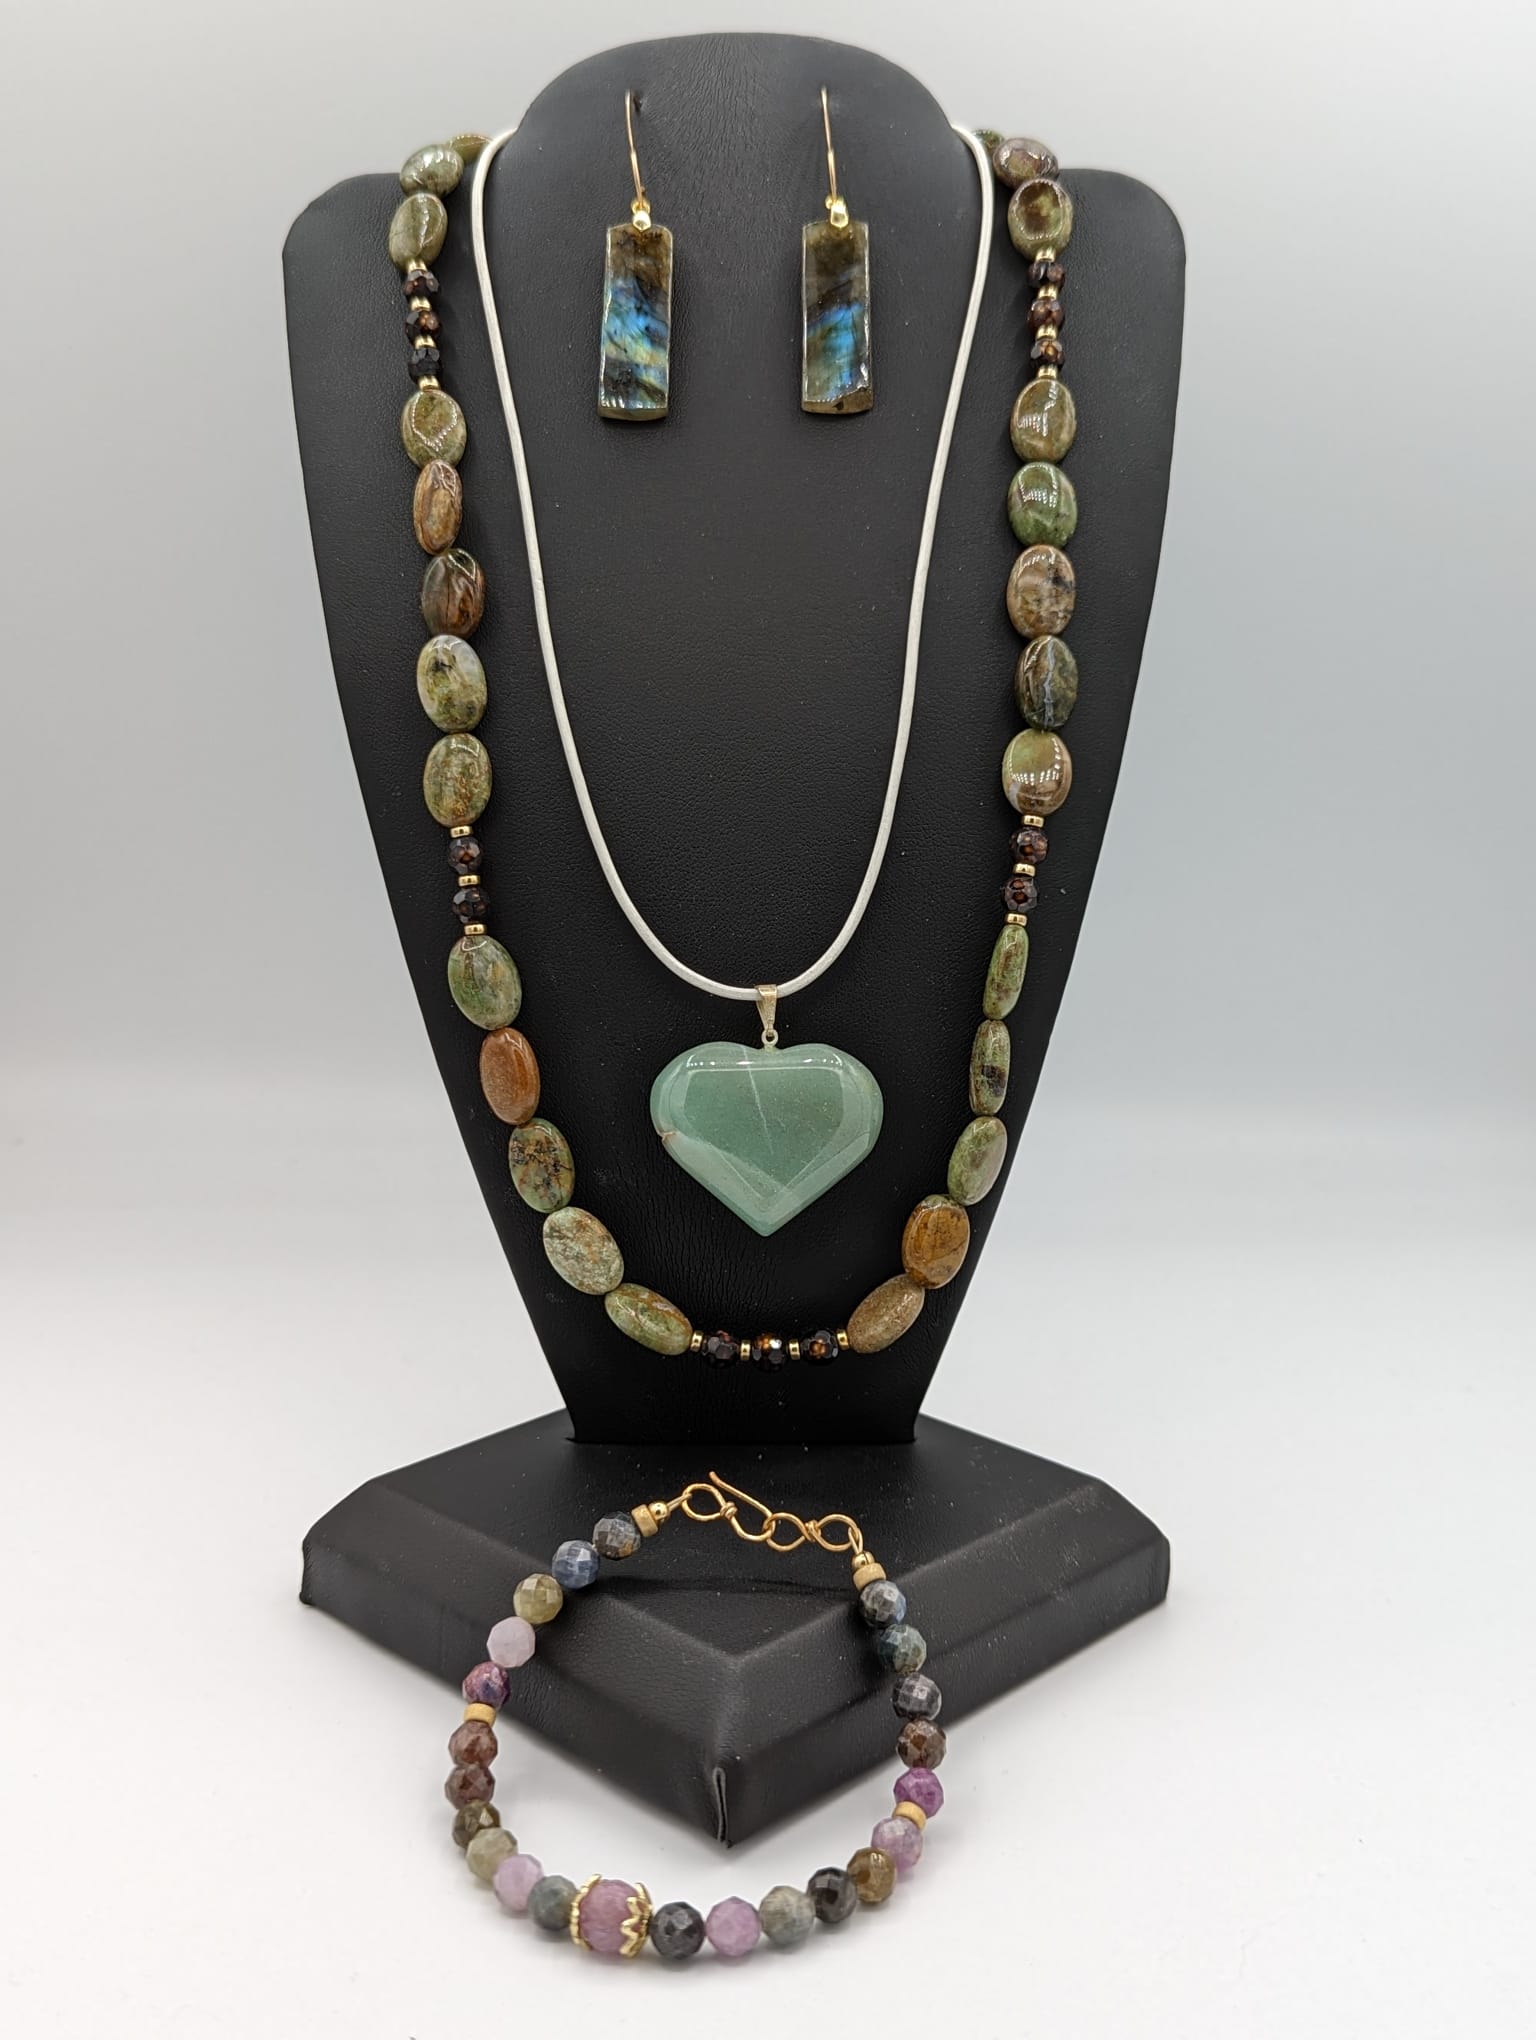 Australian opal necklace pictured with aventurine heart necklace, and sapphire bracelet and laboradite earrings